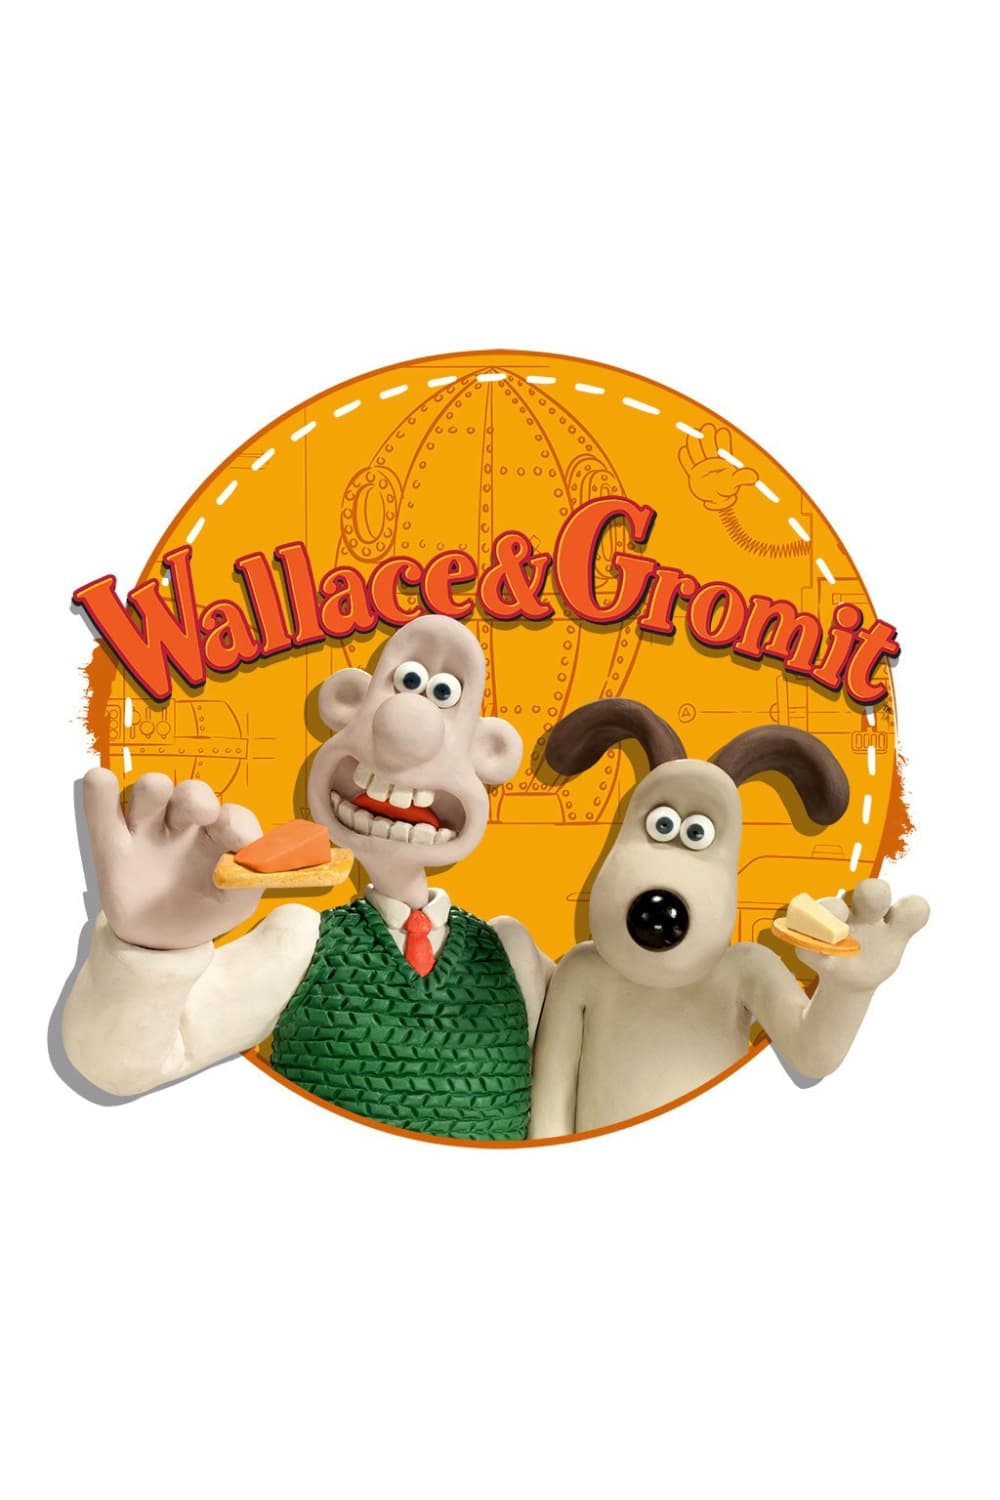 Wallace & Gromit: Vengeance Most Fowl